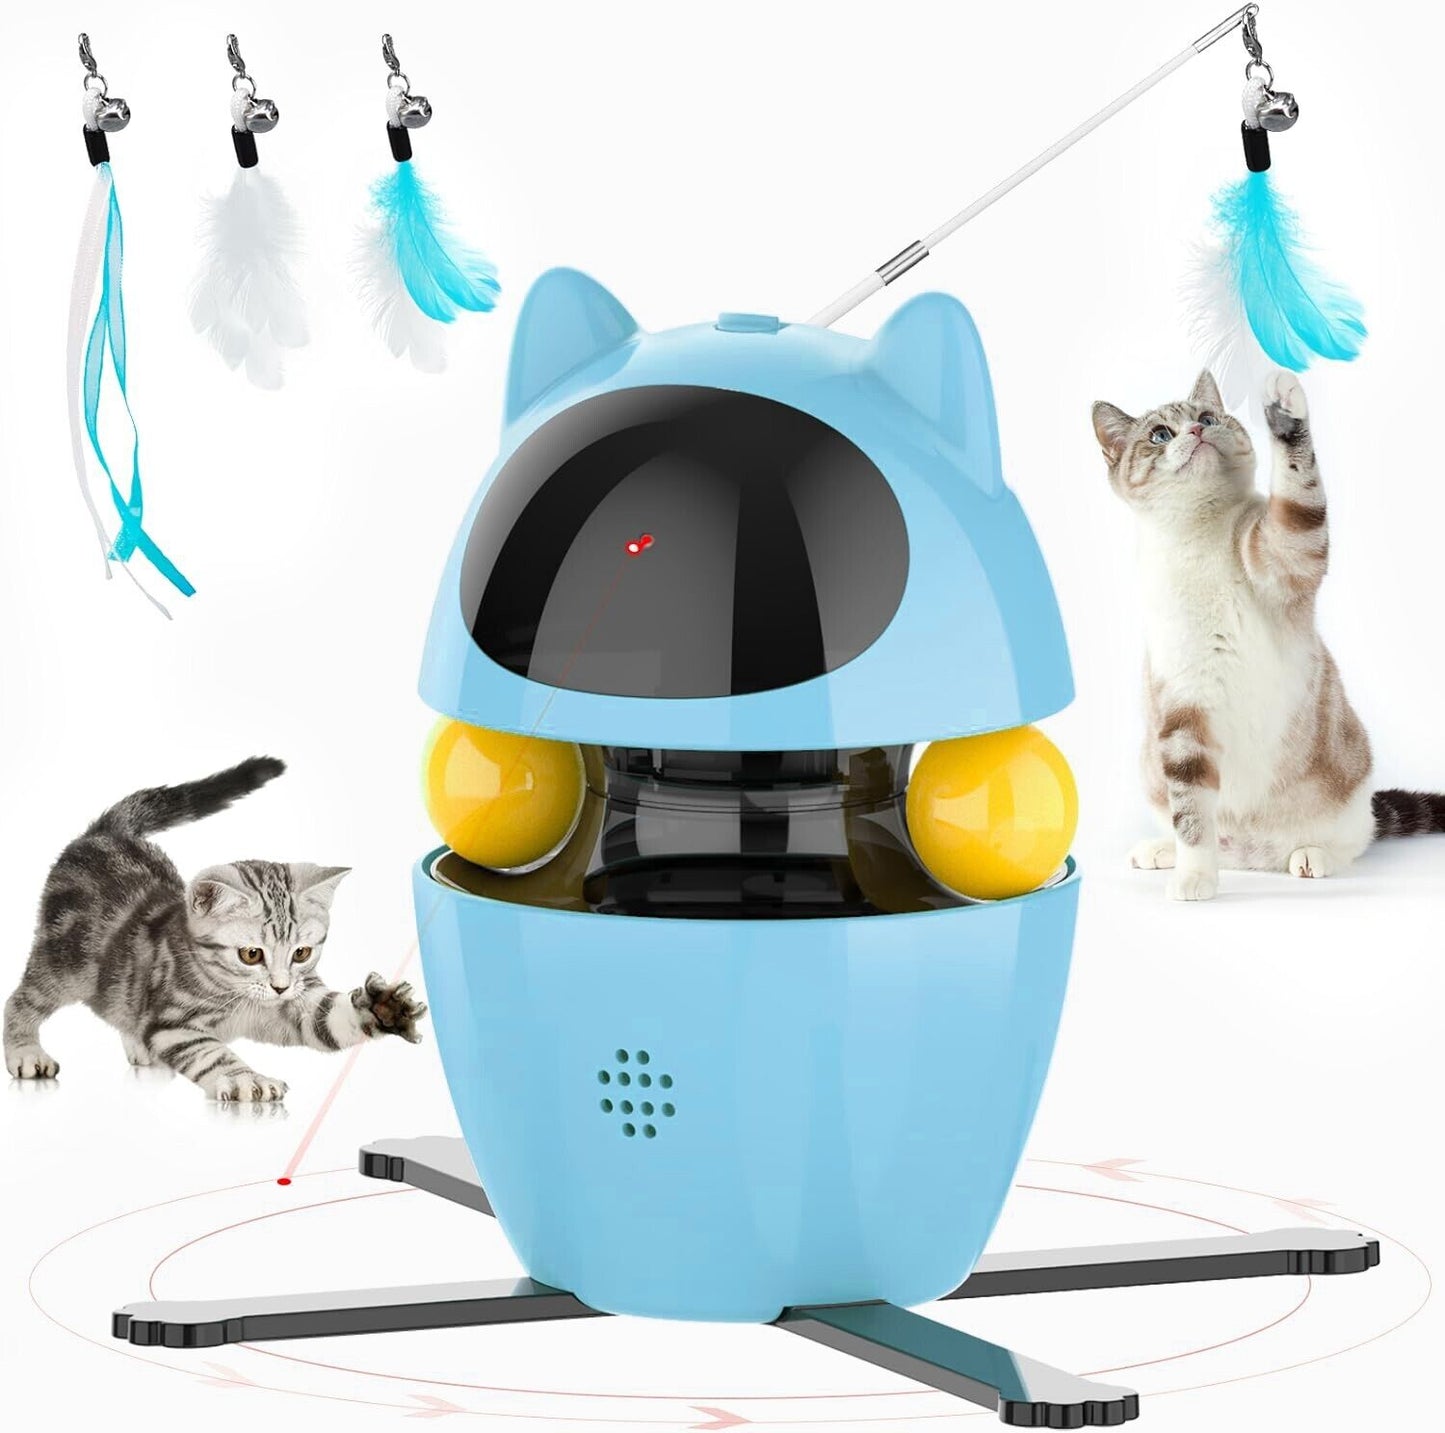 3 in 1 Automatic Interactive Cat Electric Toys